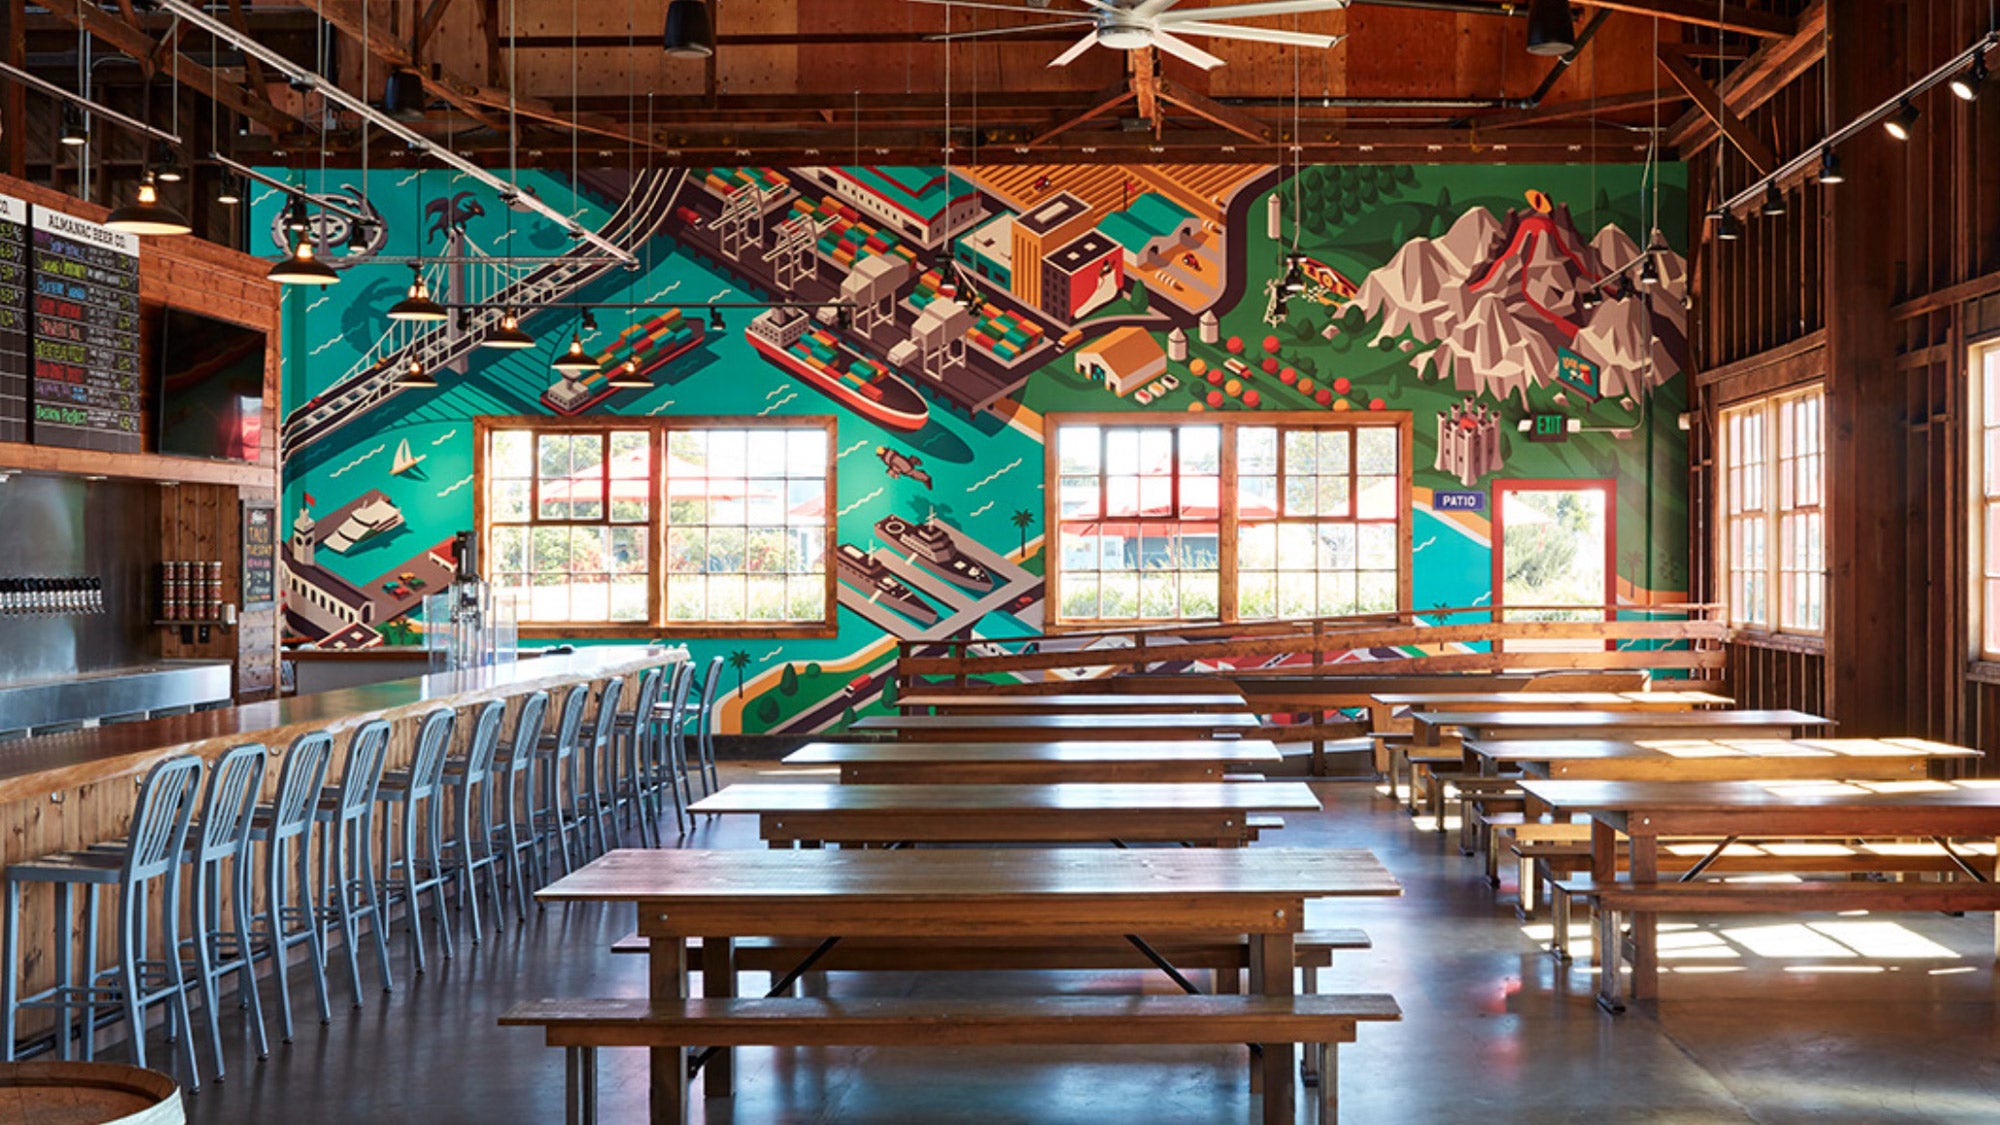 Taproom - Private Event Rental Space at Almanac Brewery